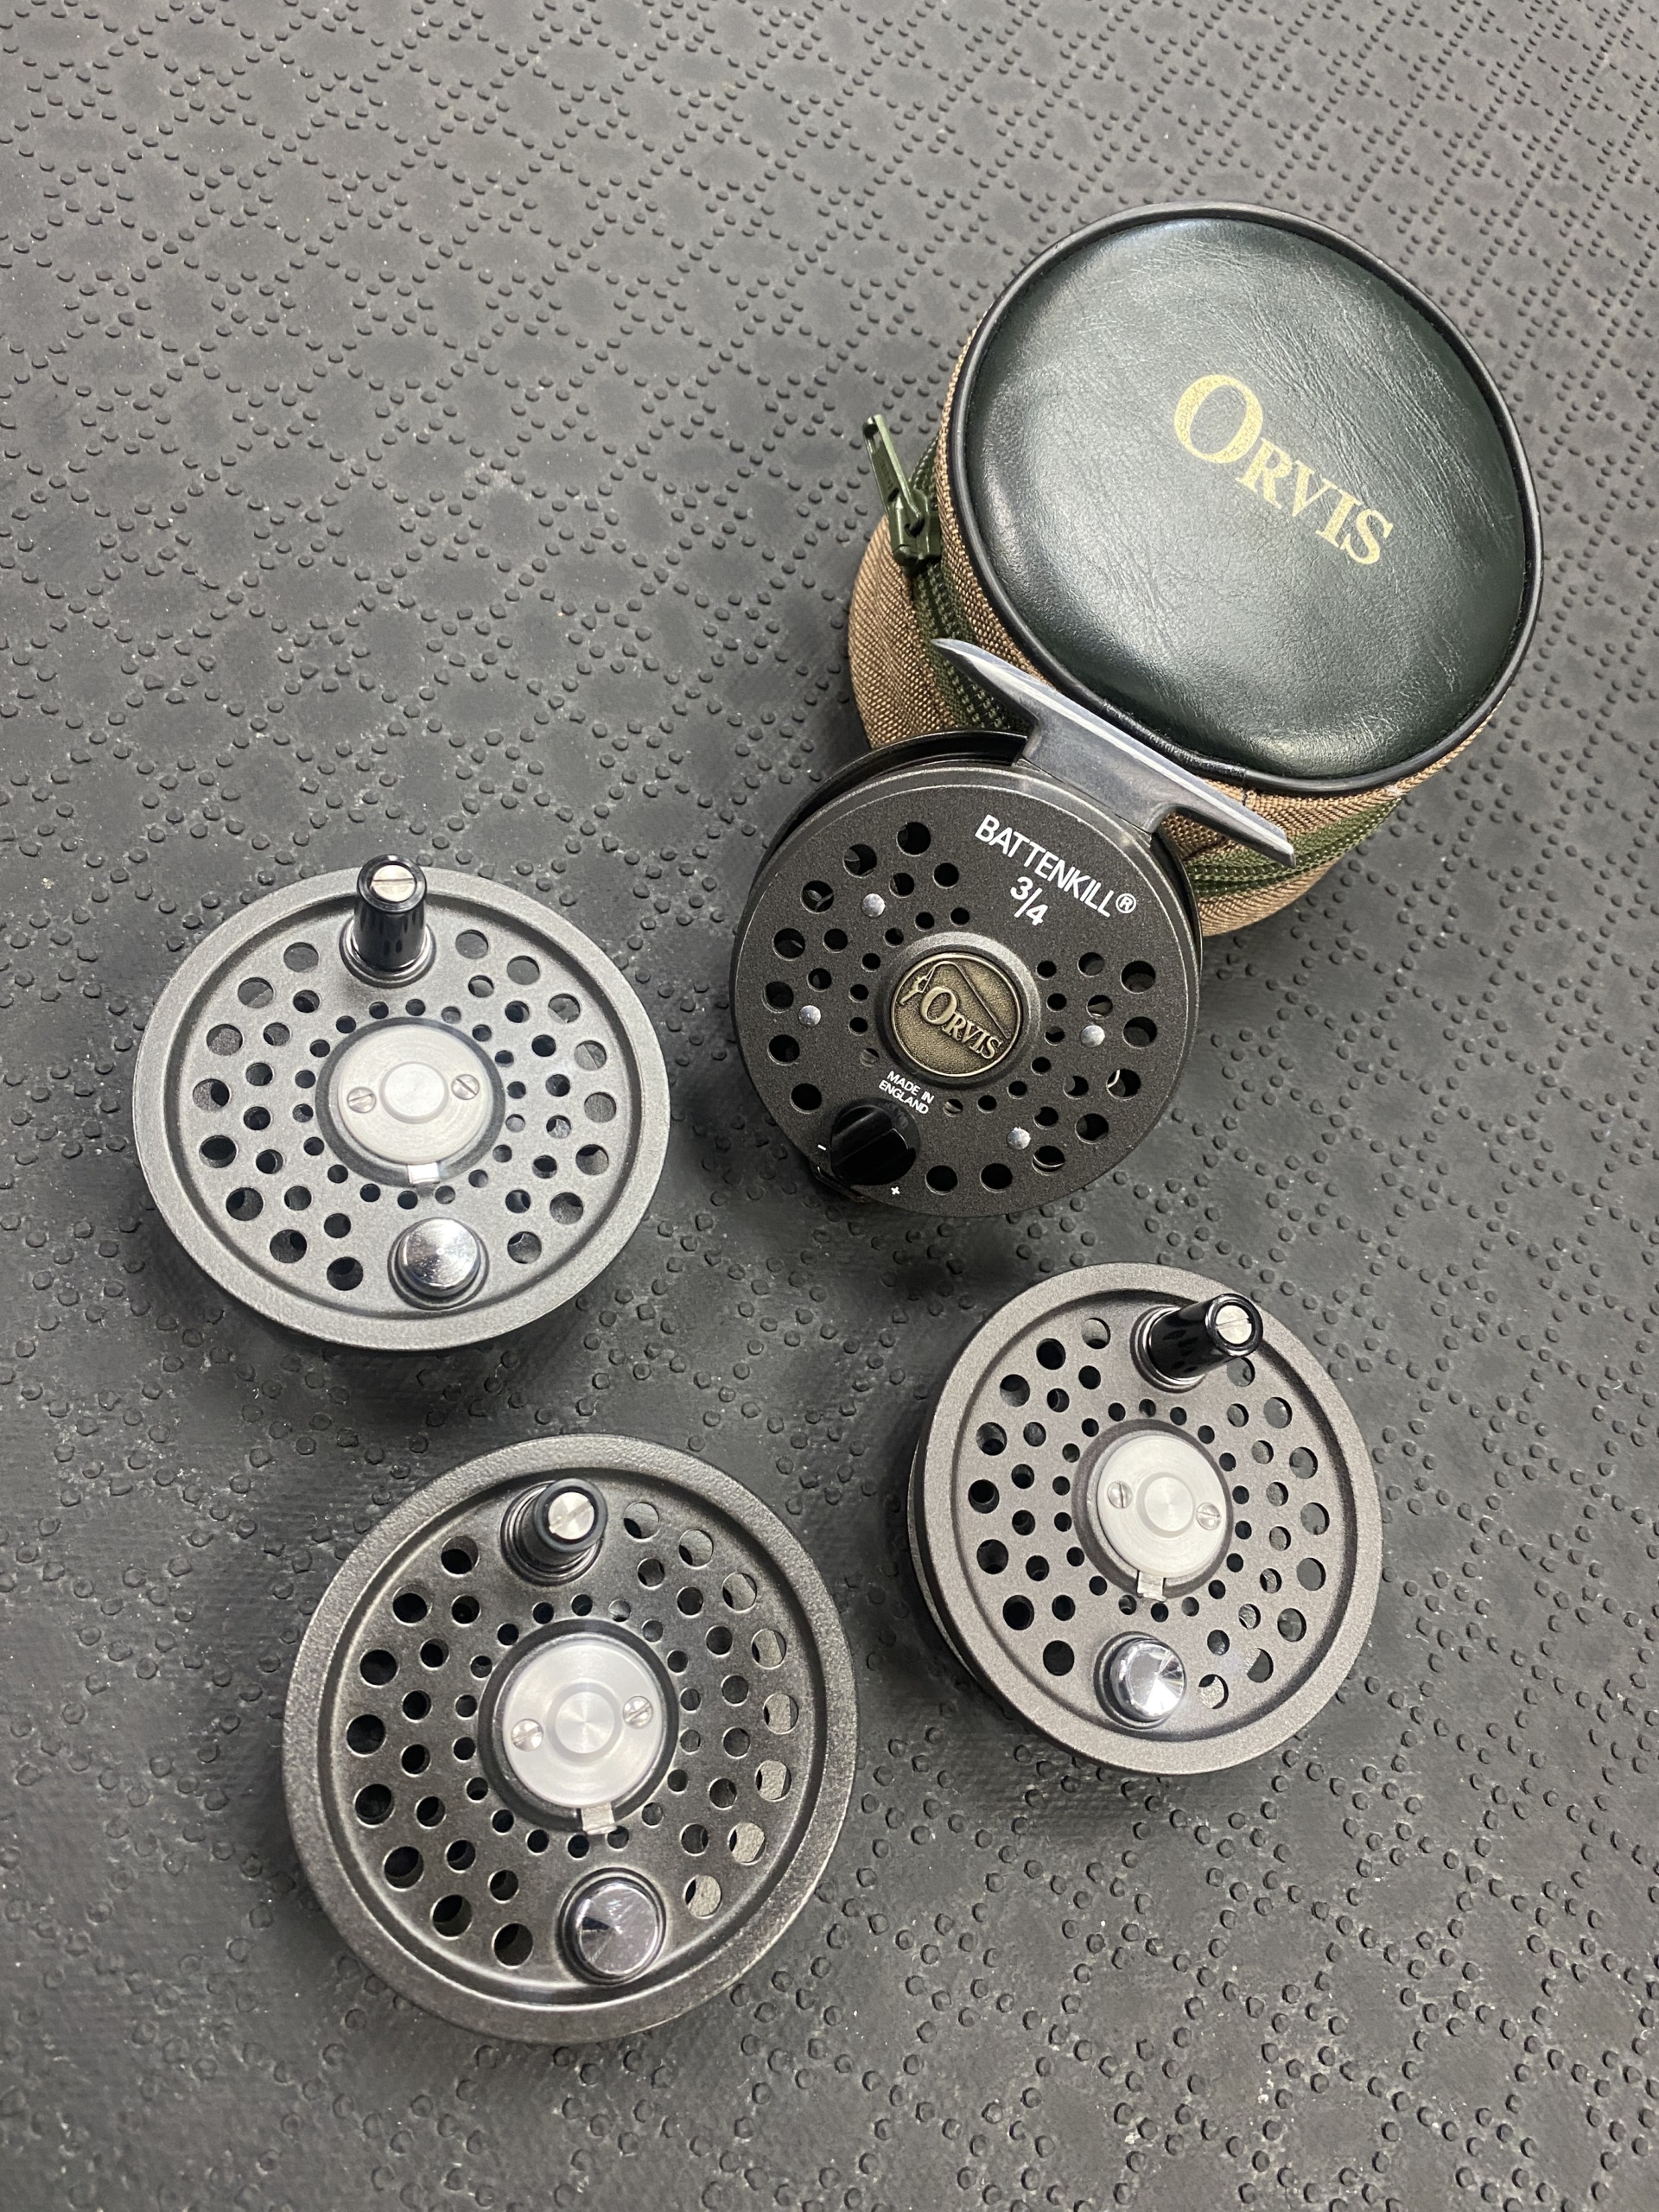 Orvis Battenkill 3:4 Made in England Fly Reel and 3 Spare Spools A